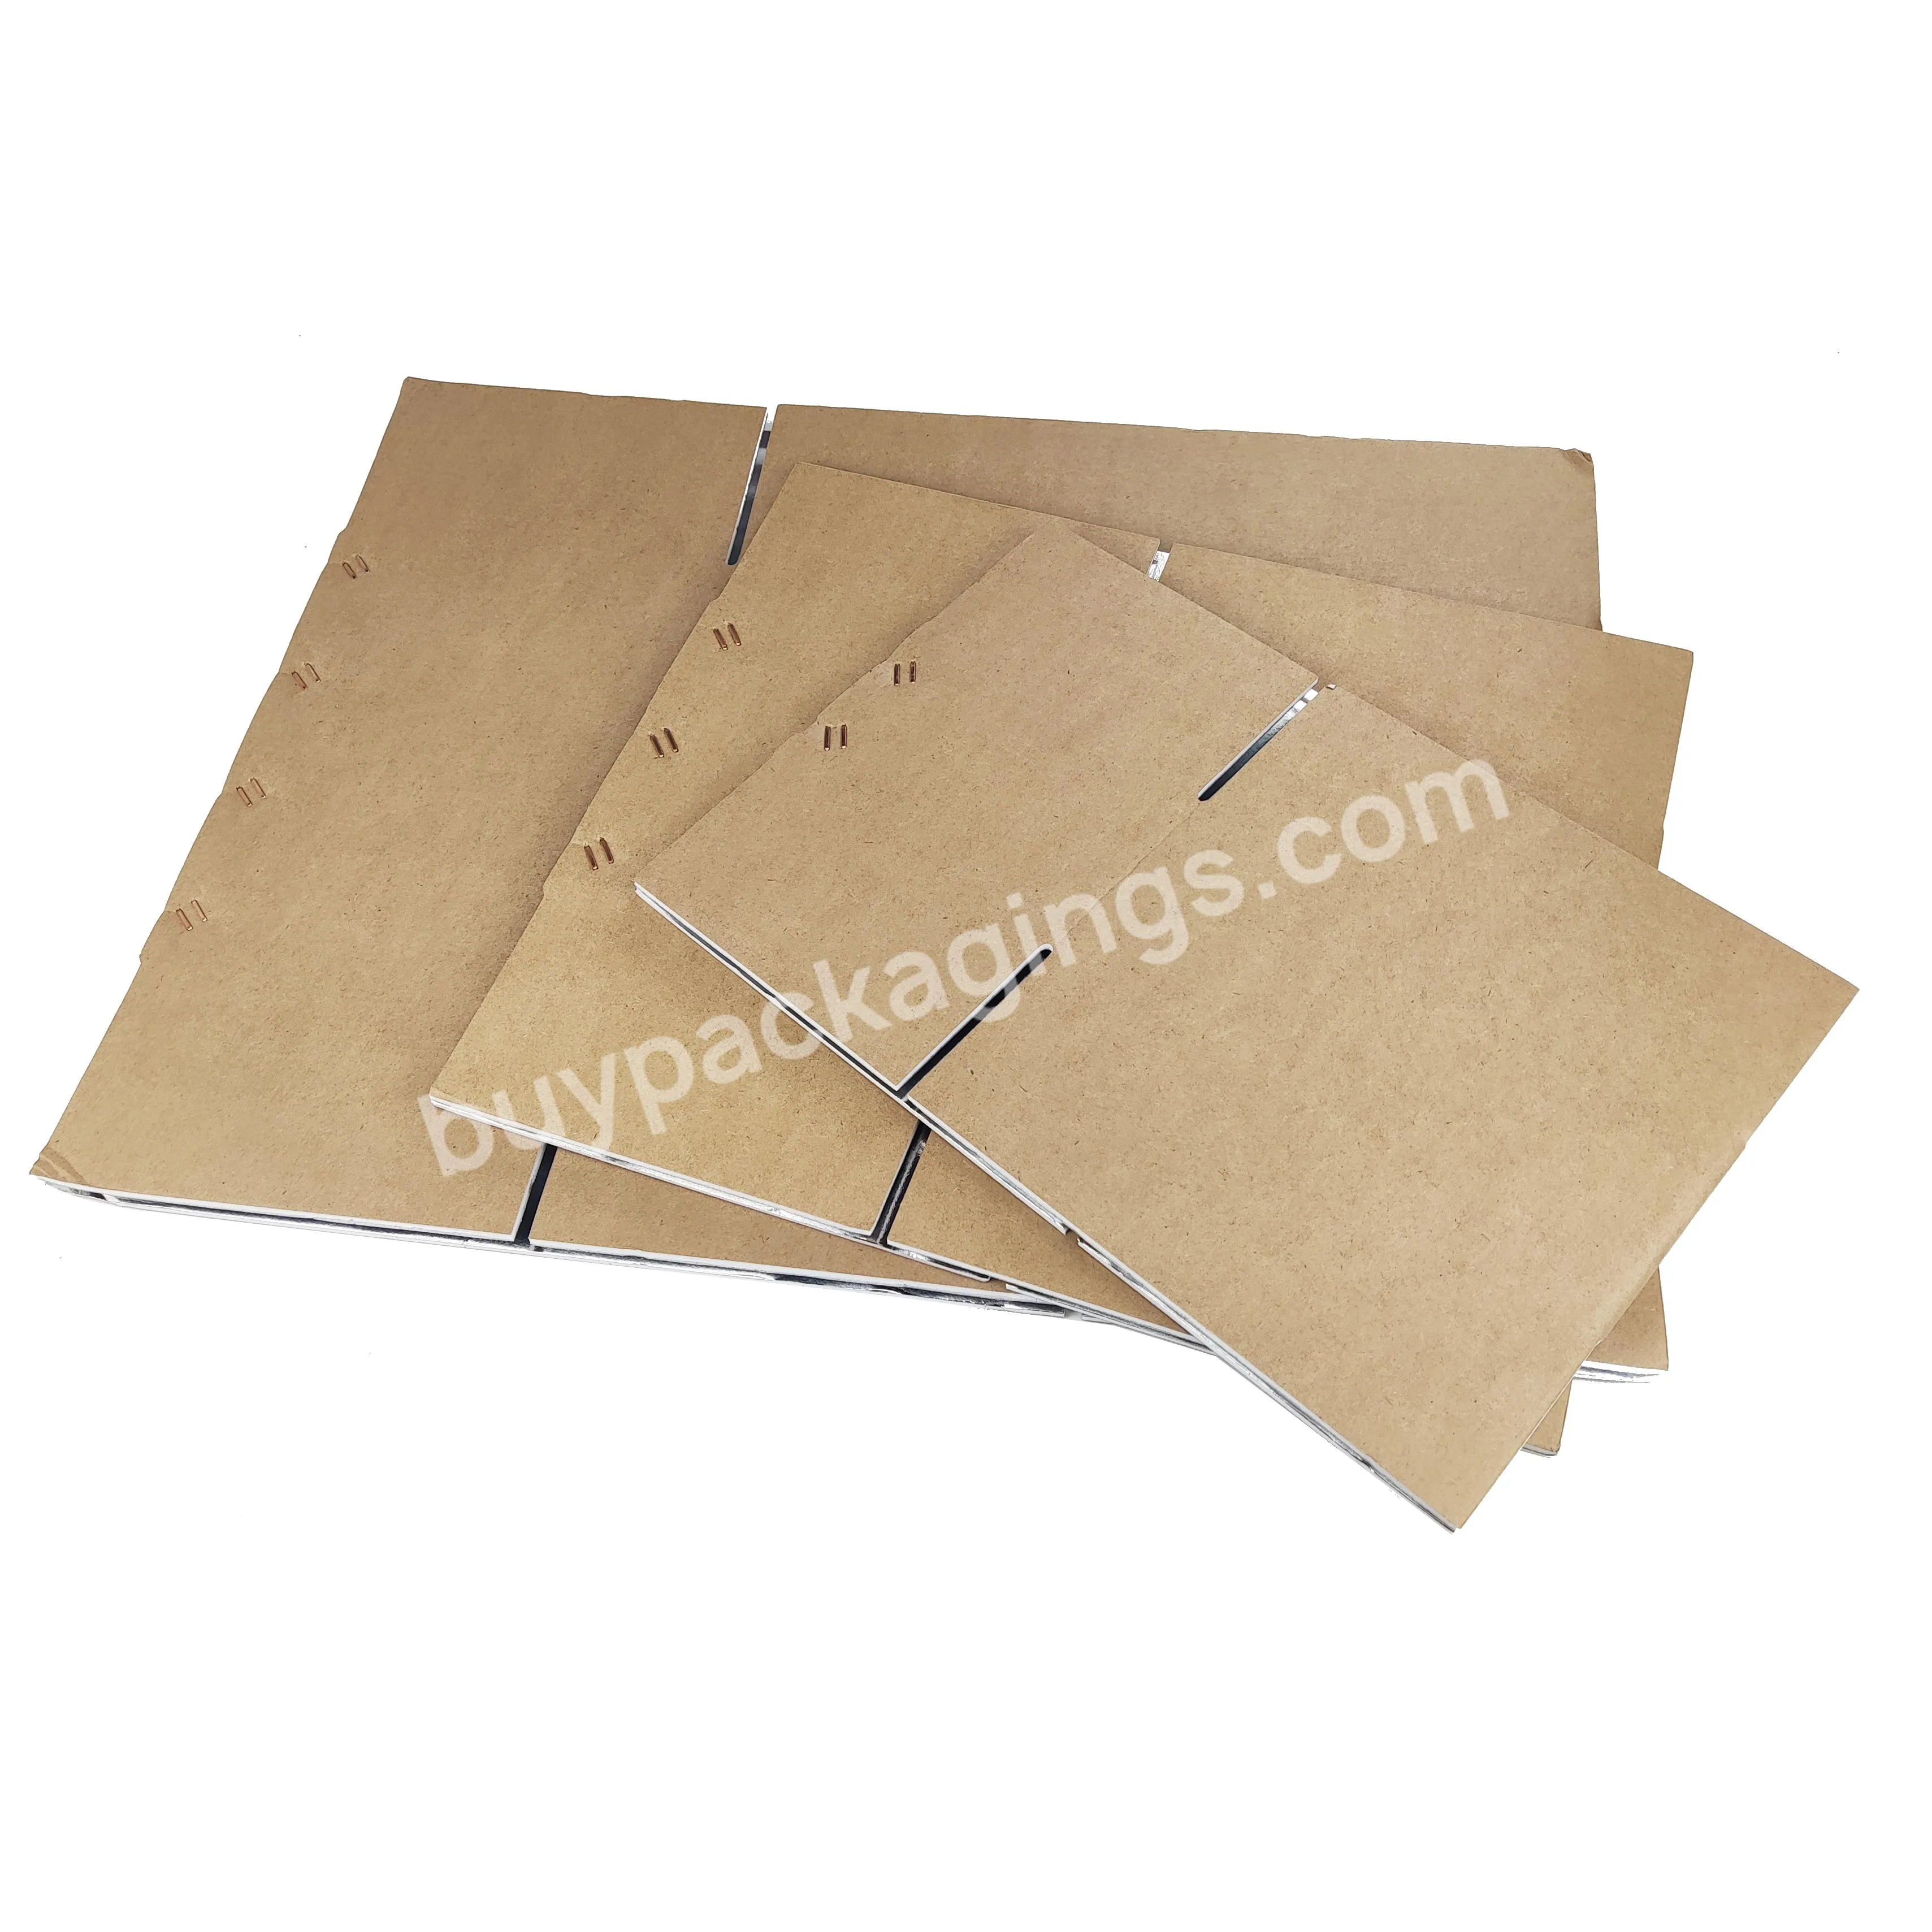 Waterproof Fresh Cold Shipping Corrugated Carton Aluminum Foil Foam Thermal Insulated Boxes For Delivery